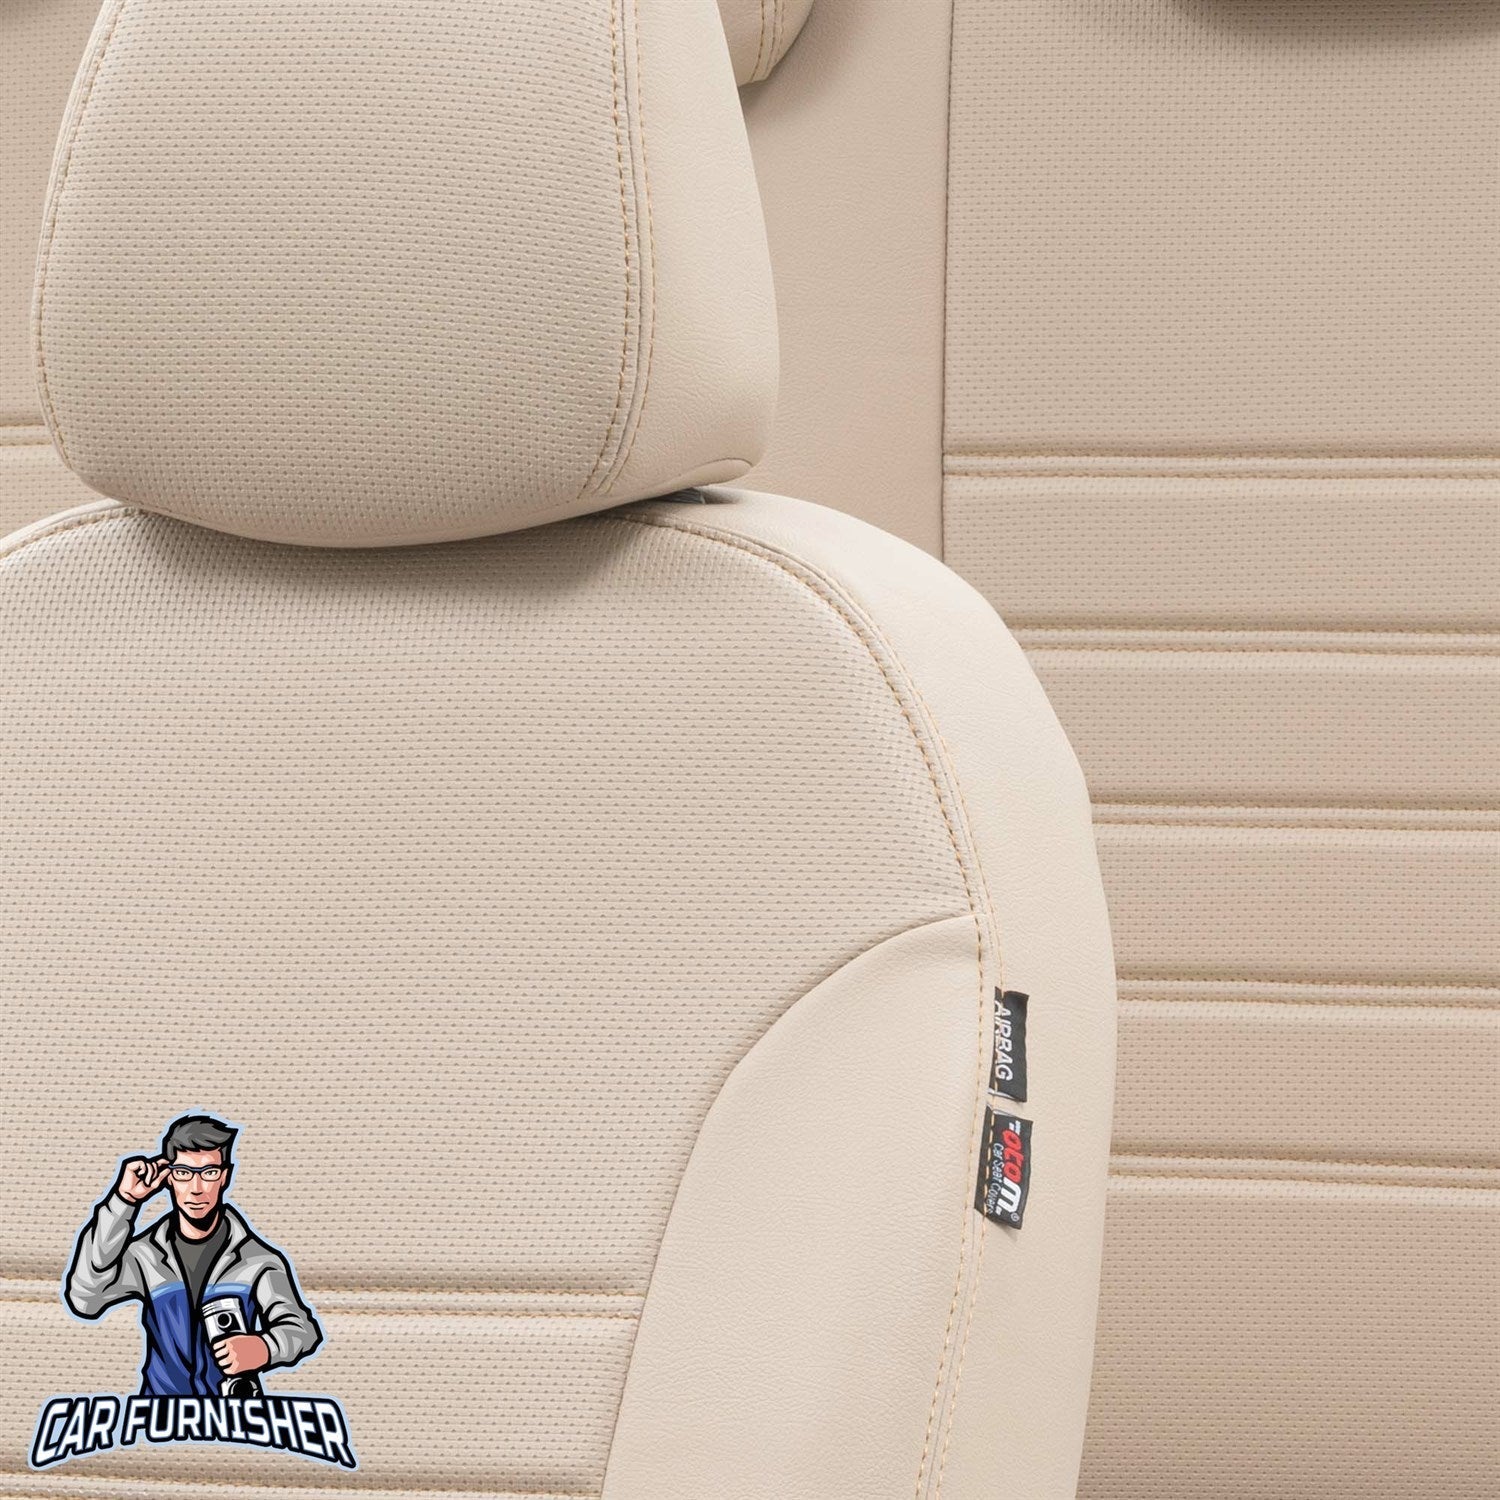 Volkswagen Sharan Seat Cover New York Leather Design Beige Leather